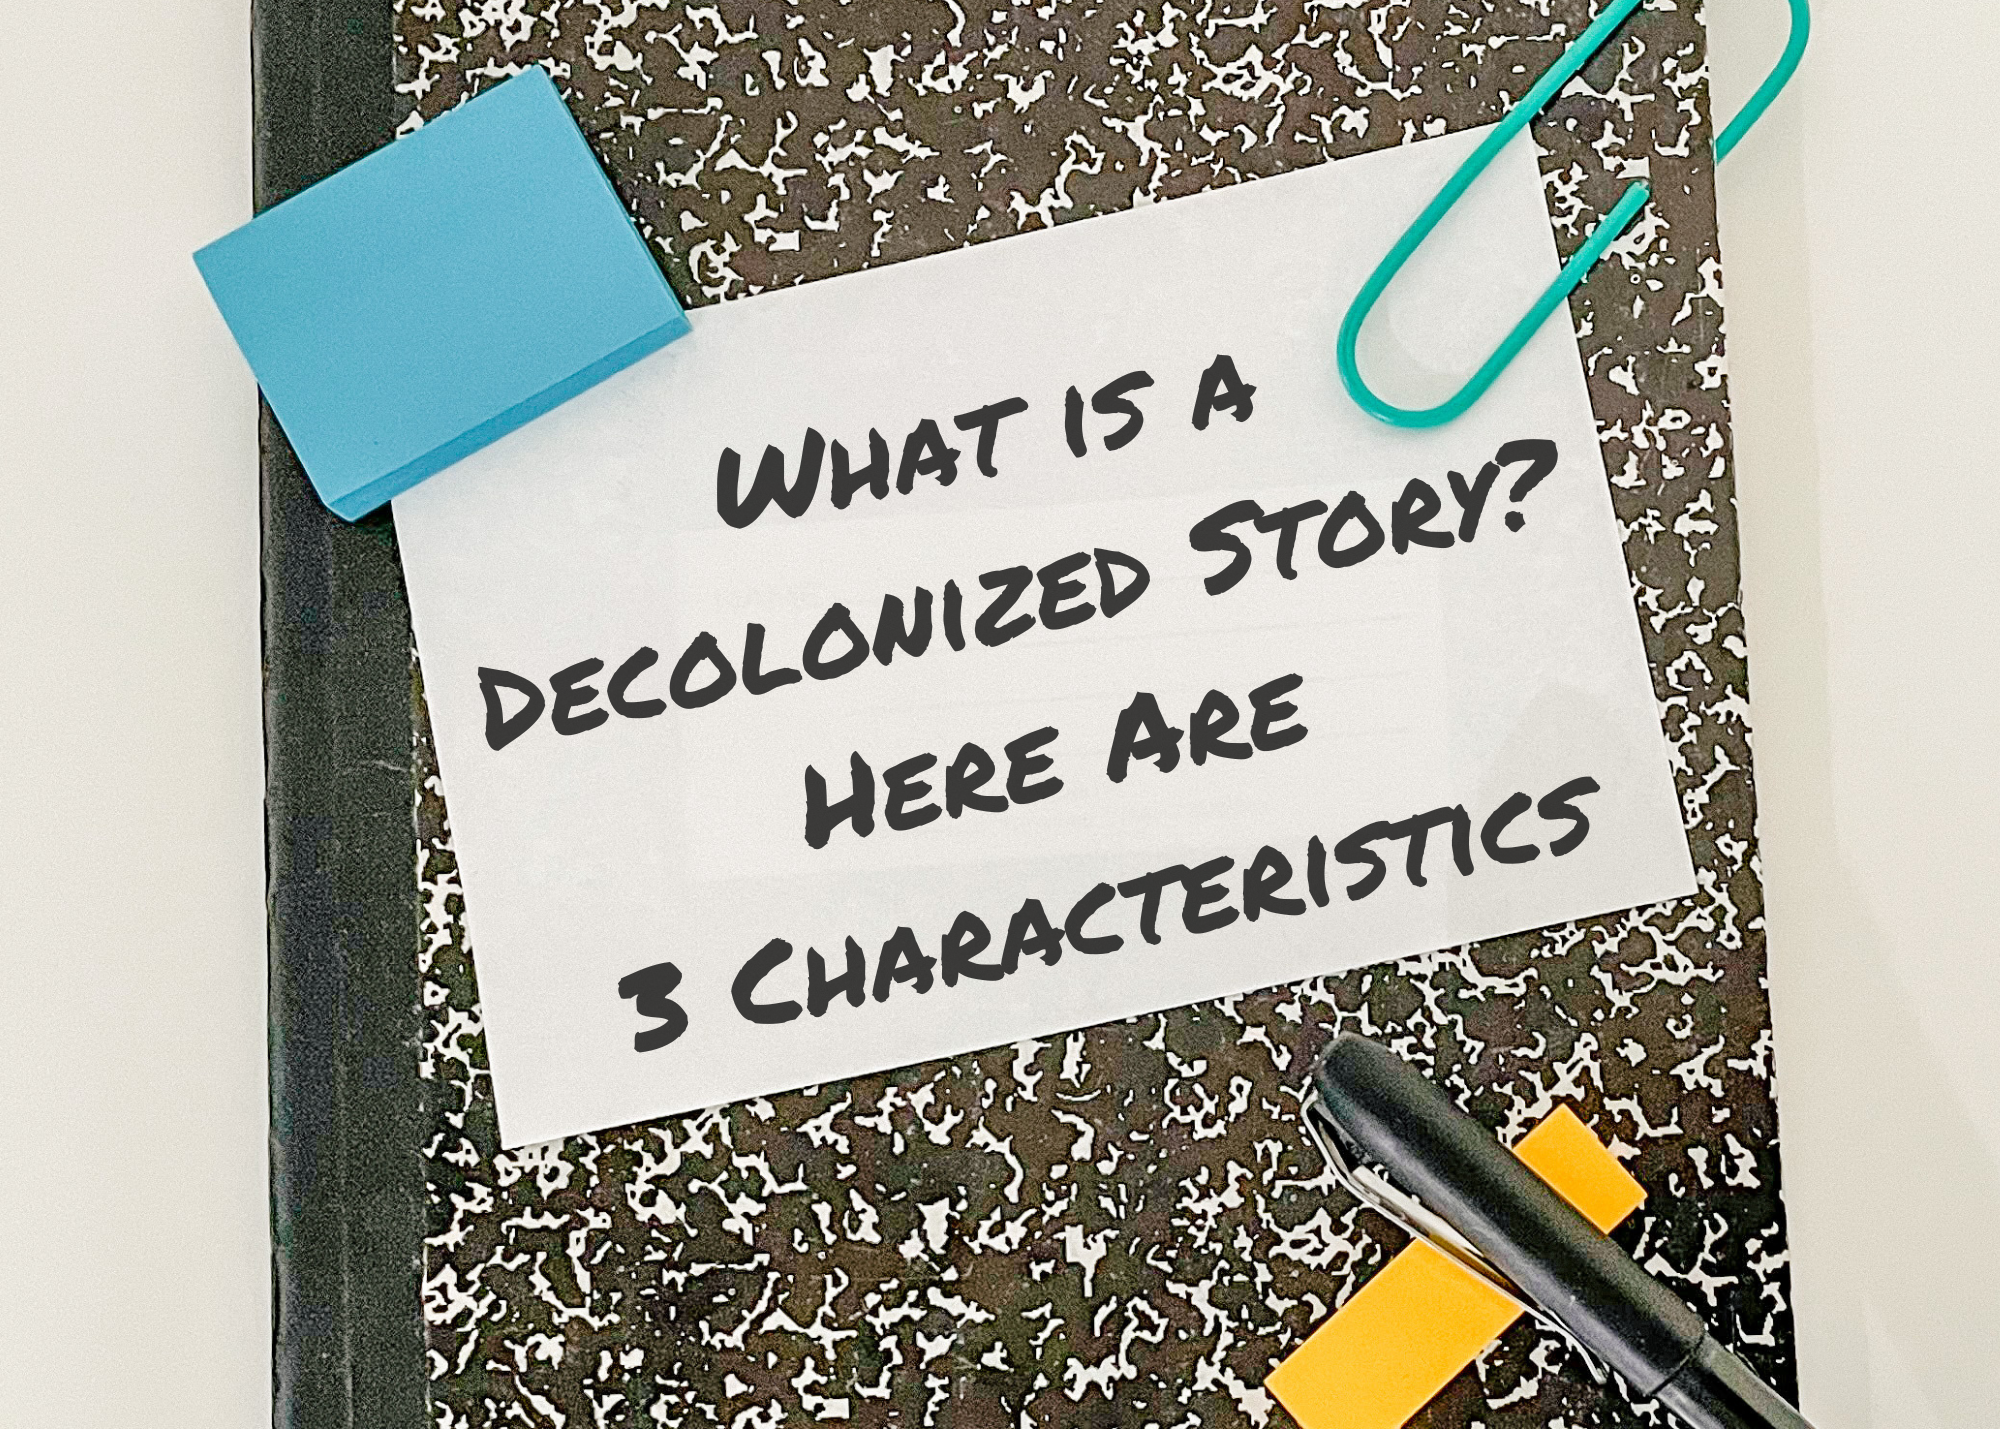 What is a Decolonized Story? Here Are 3 Characteristics